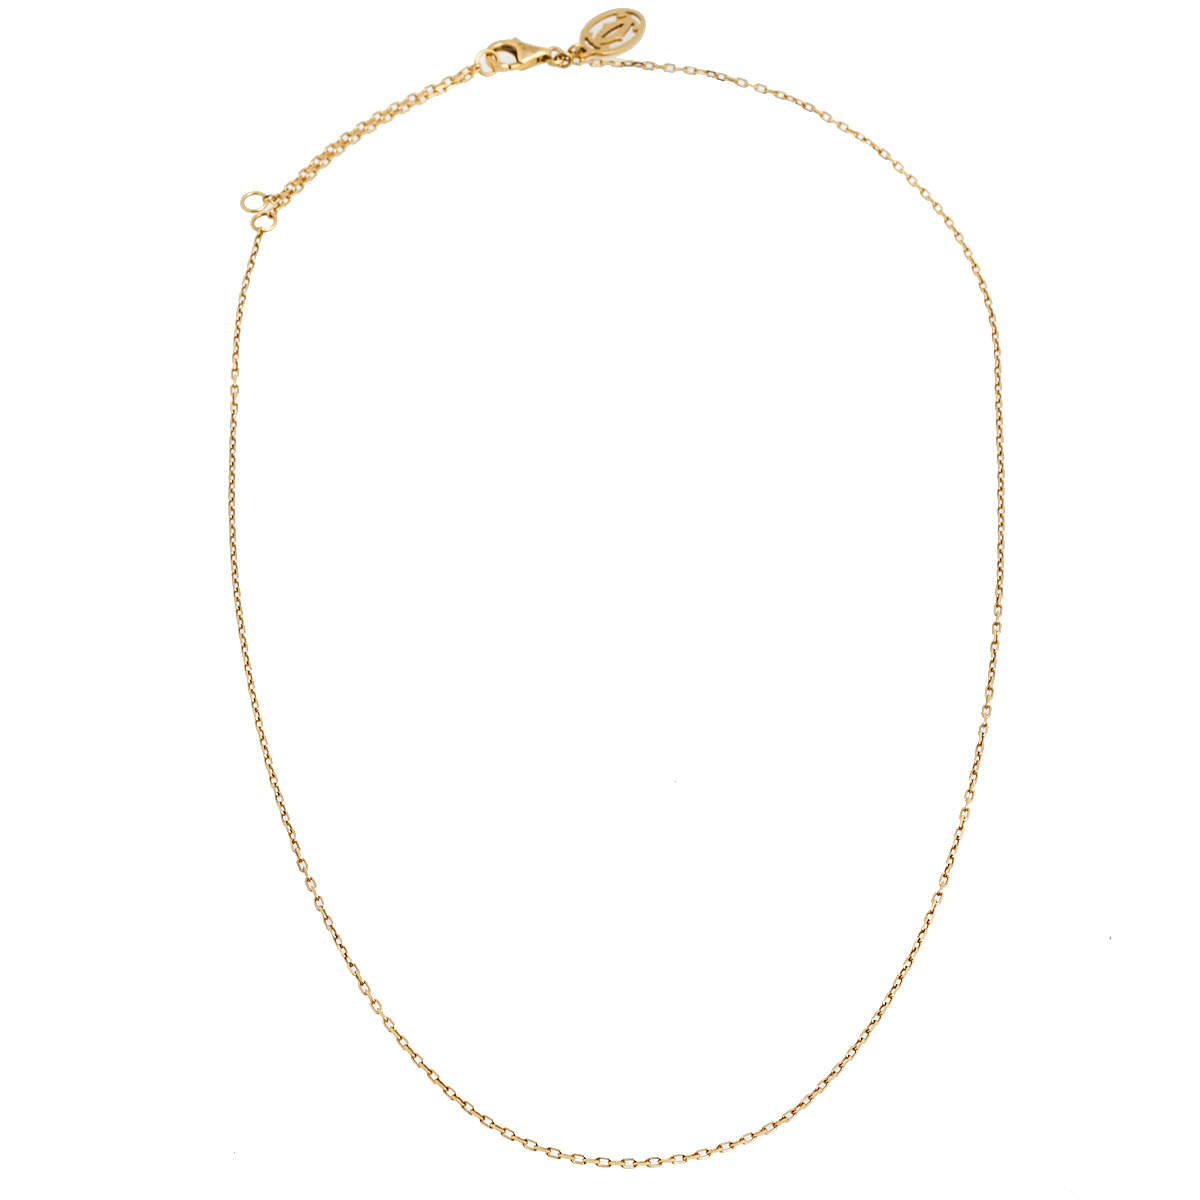 Cartier 18K Yellow Gold Chain Necklace